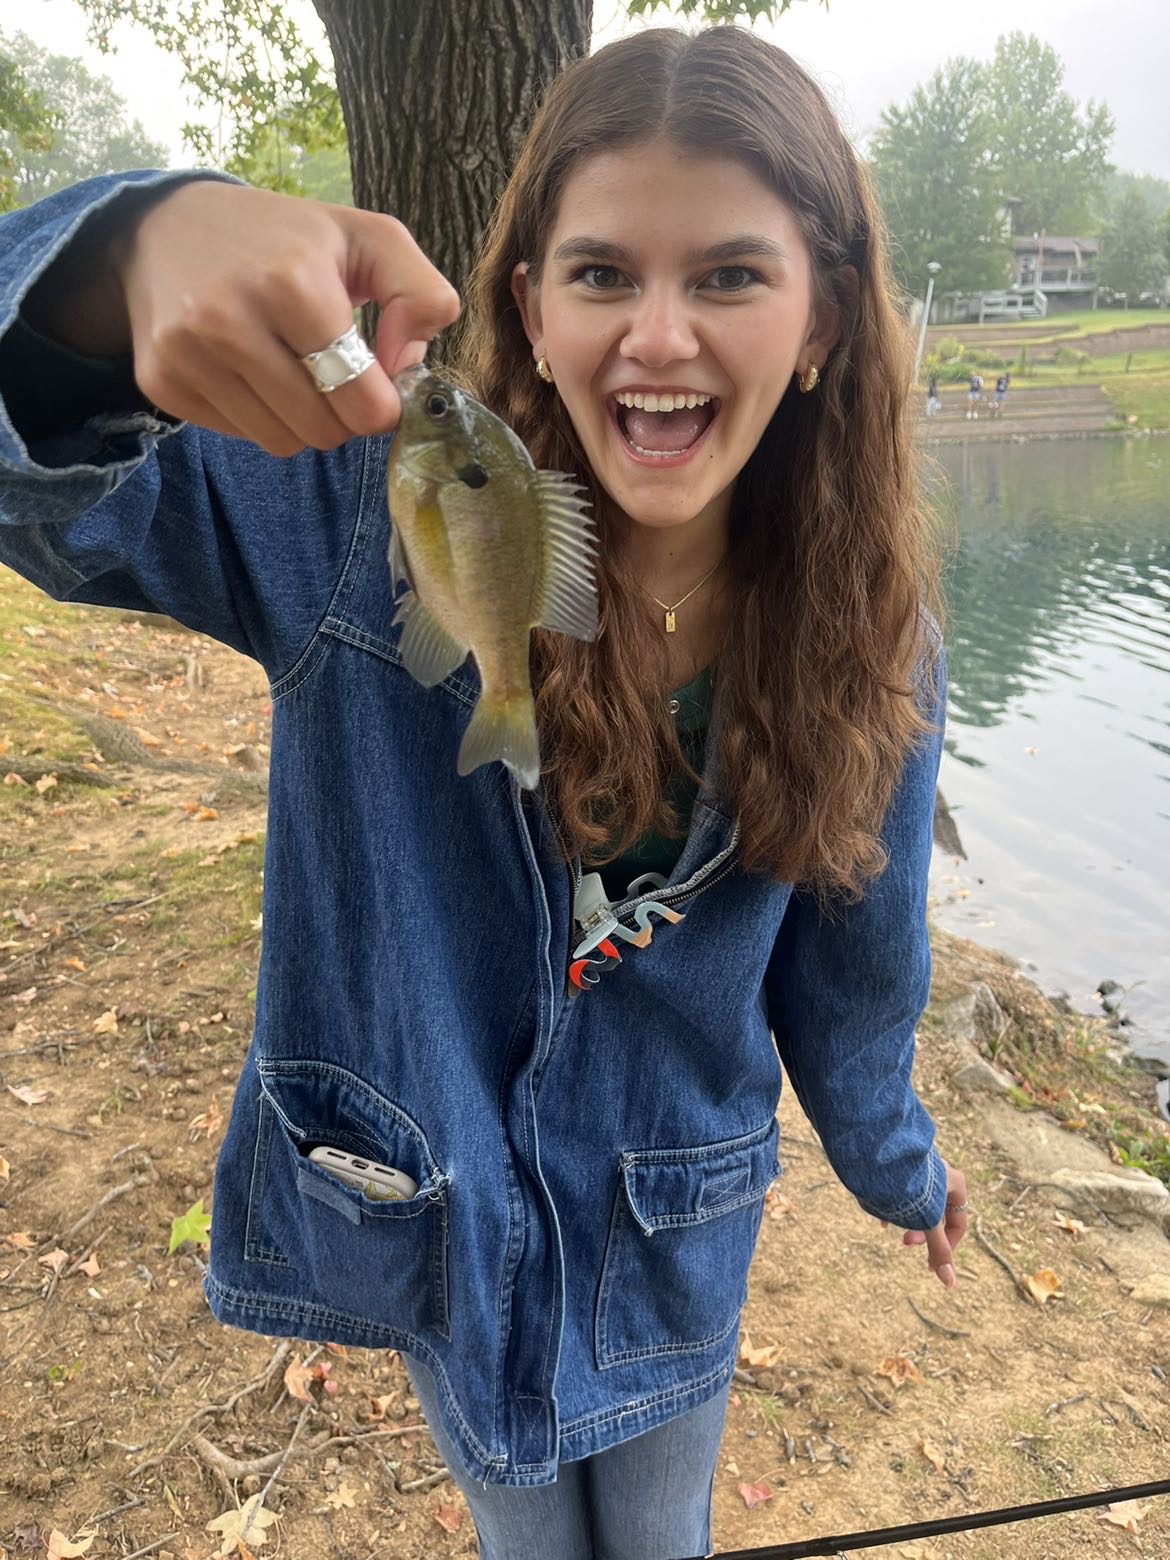 Senior Tiana Paul holds up a fish she caught at the pond in the Glan Tai neighborhood. Paul was on a field study in Mr. Richardsons Zoology class.